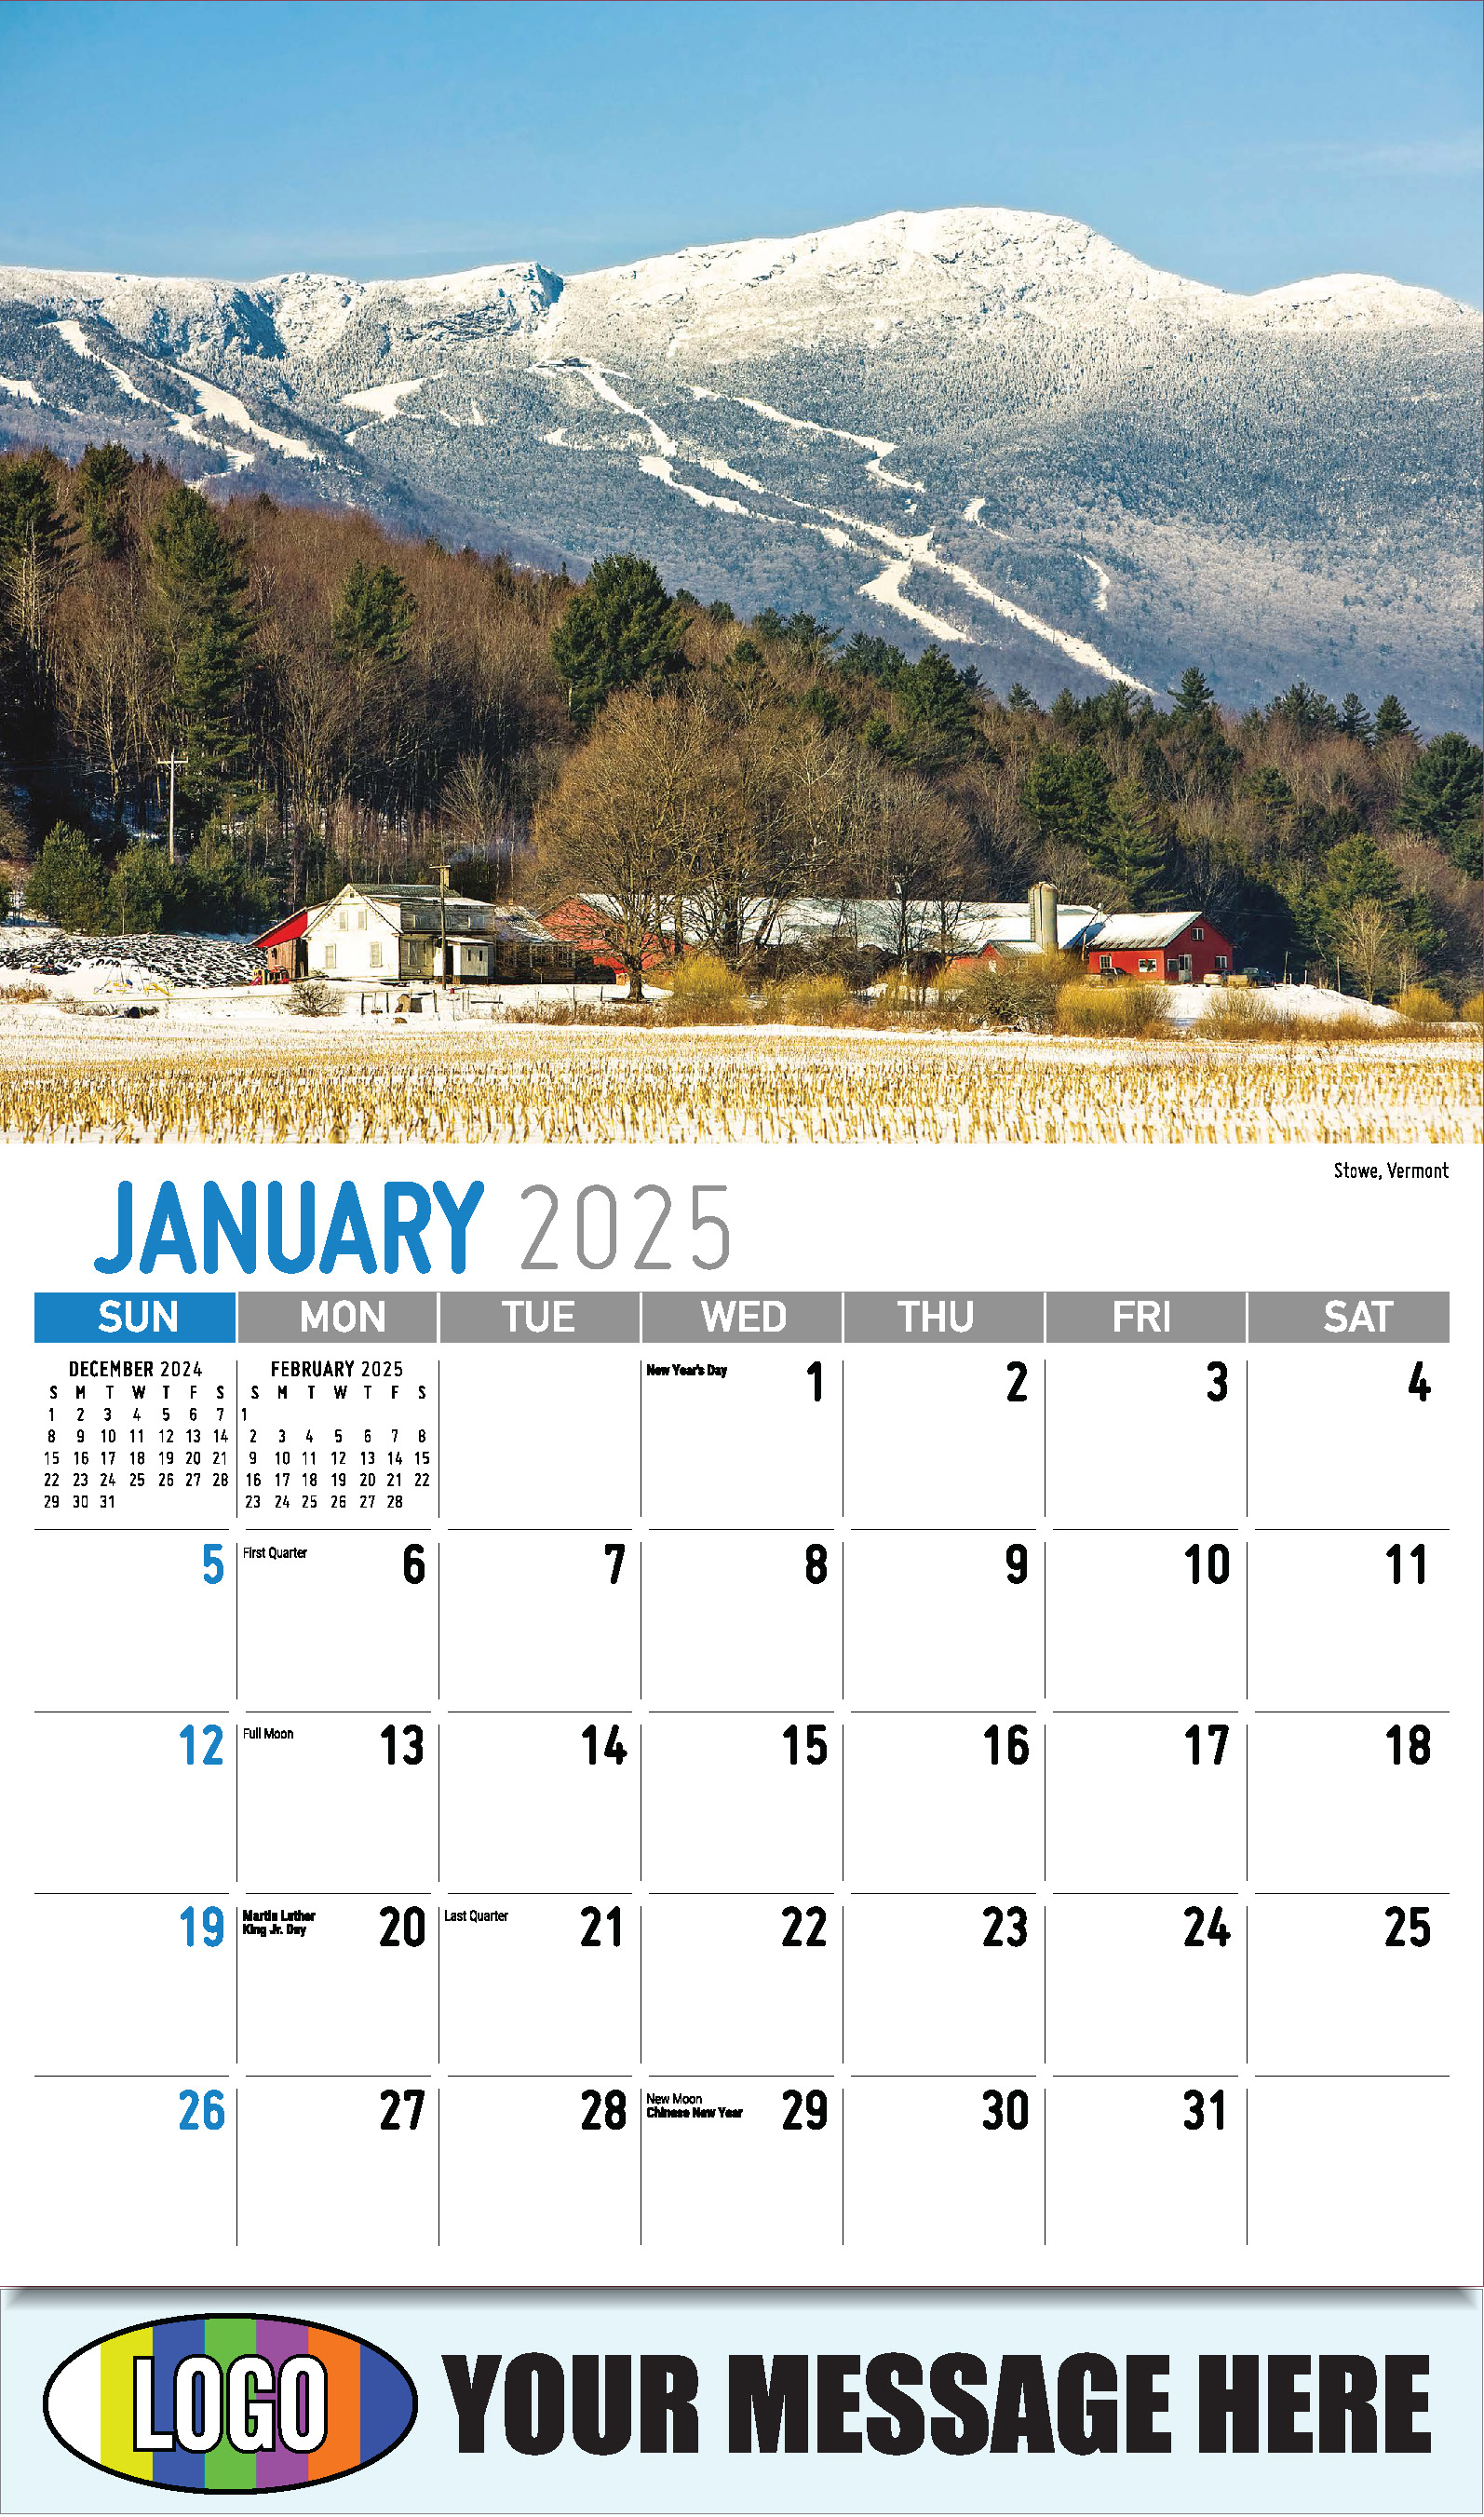 Scenes of New England 2025 Business Advertising Wall Calendar - January